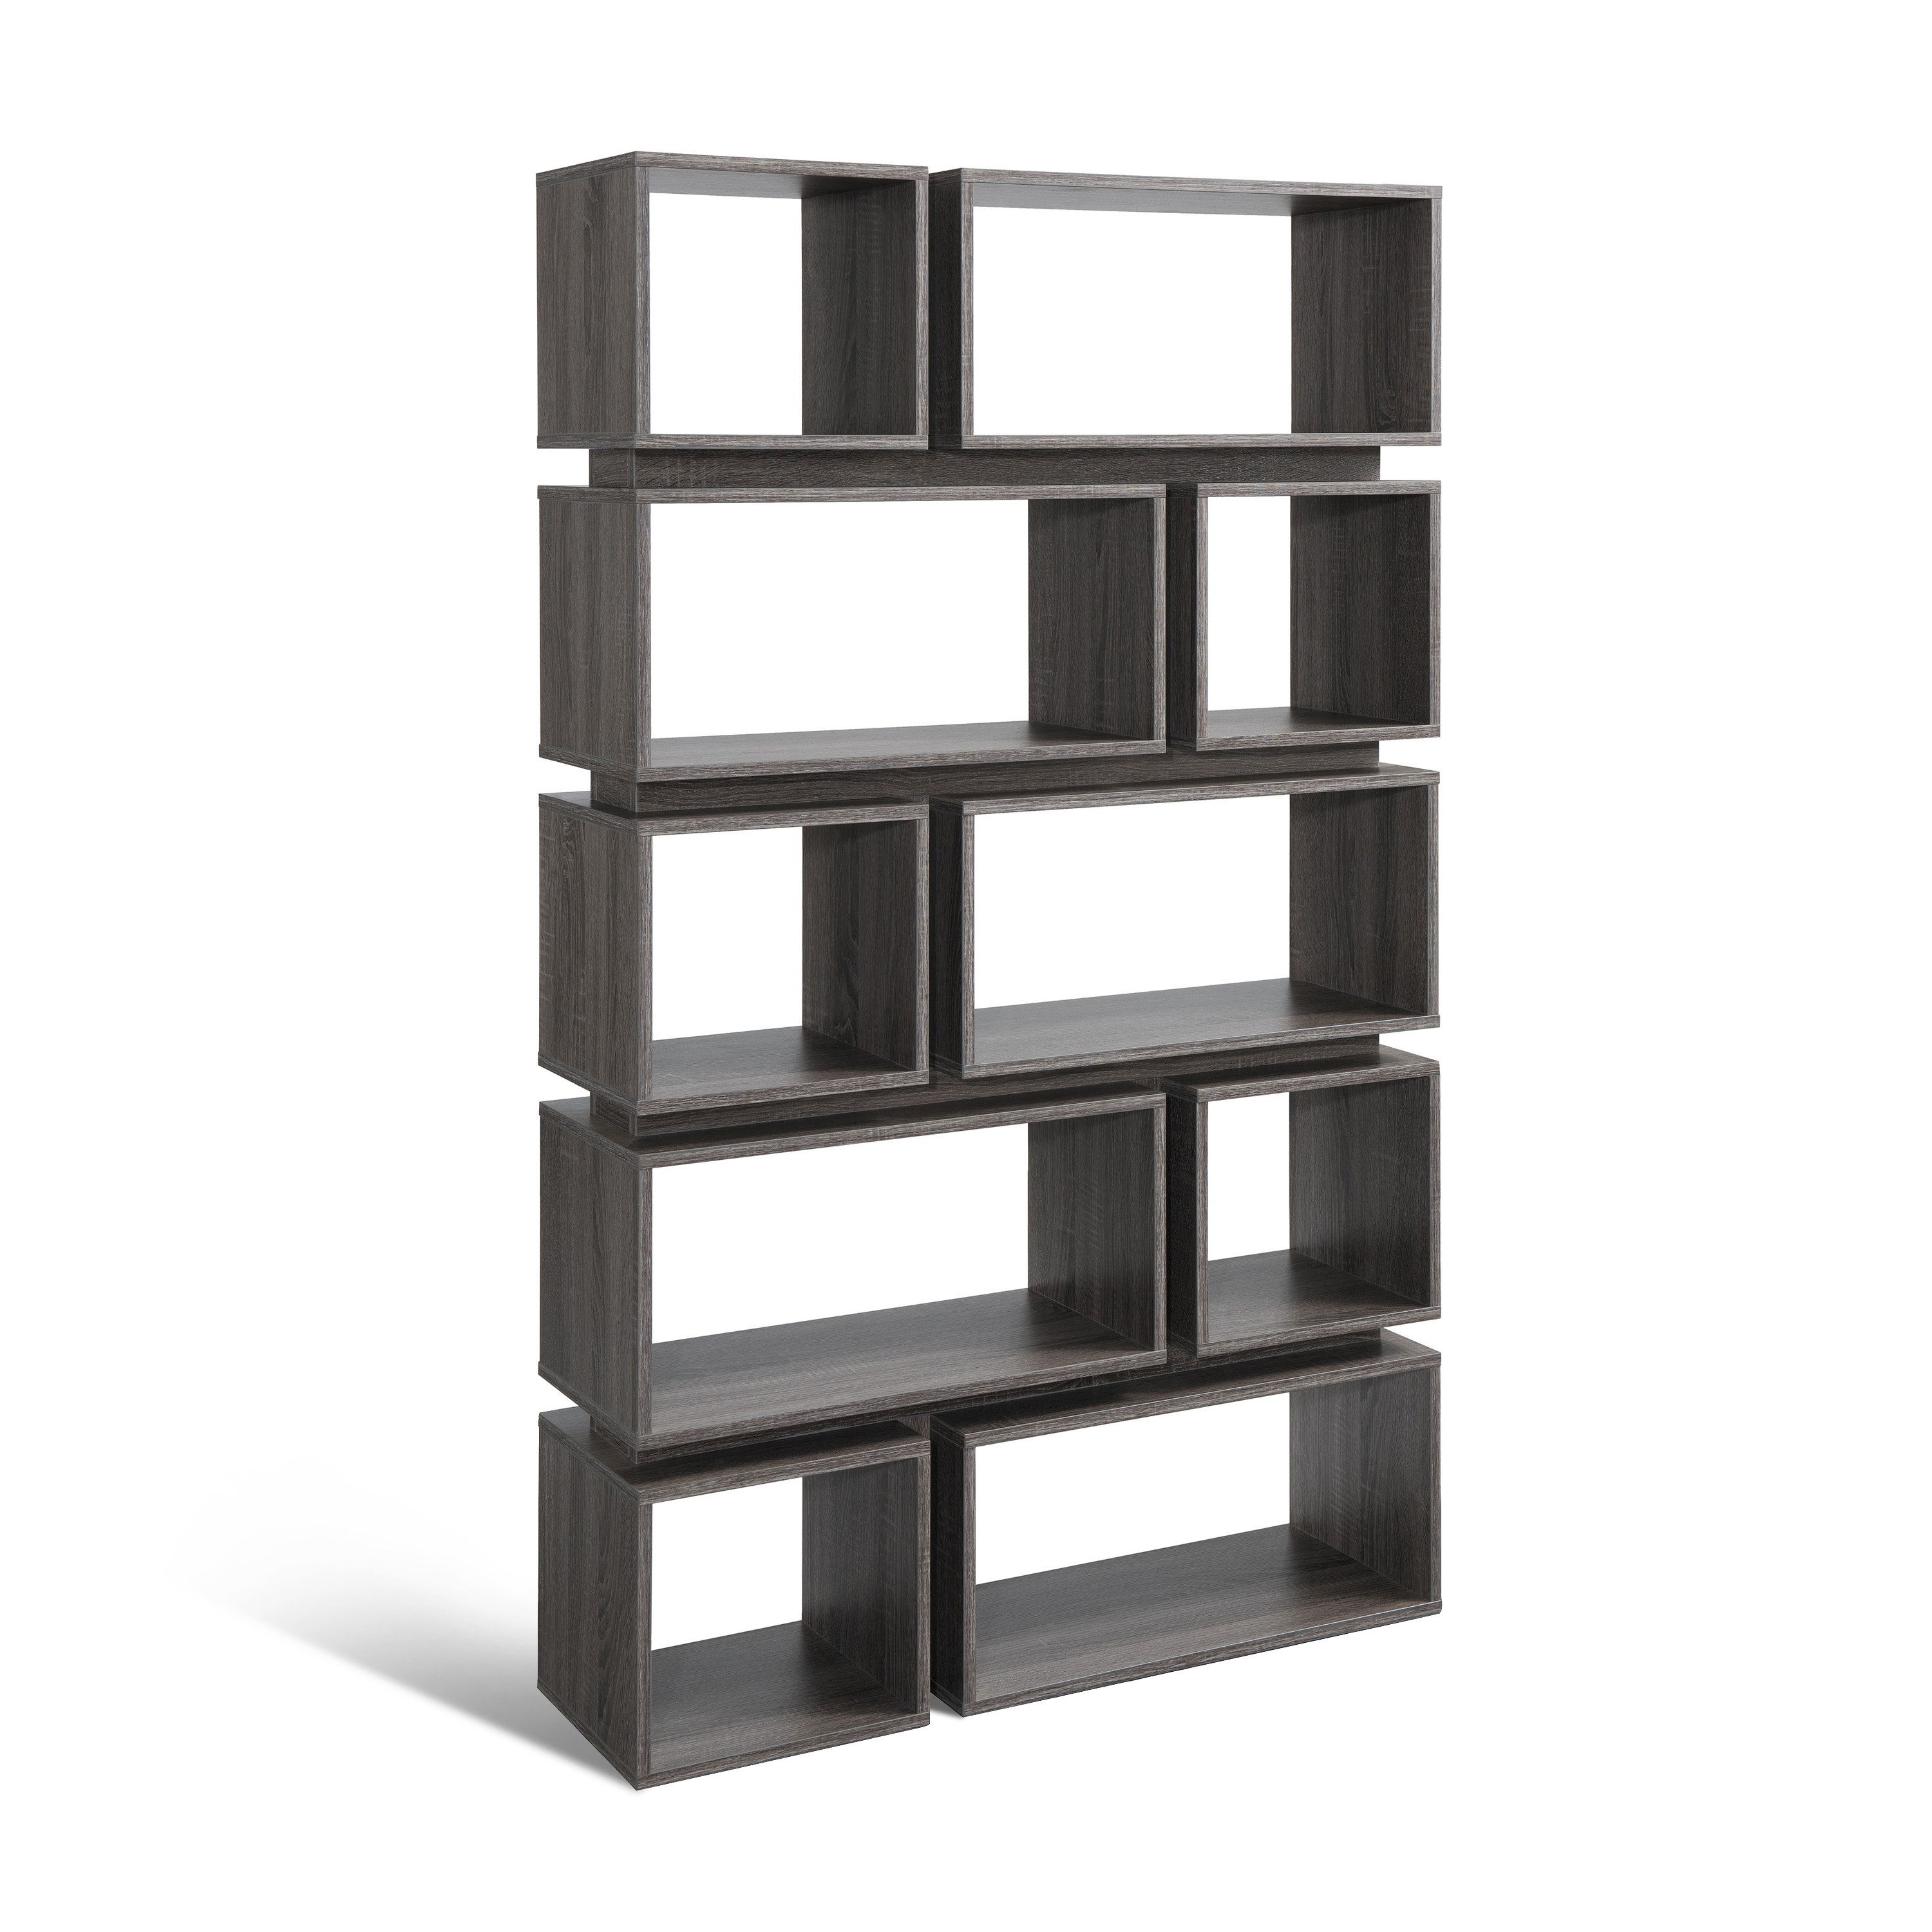 Allmodern With Regard To Cullison Standard Bookcases (View 18 of 20)